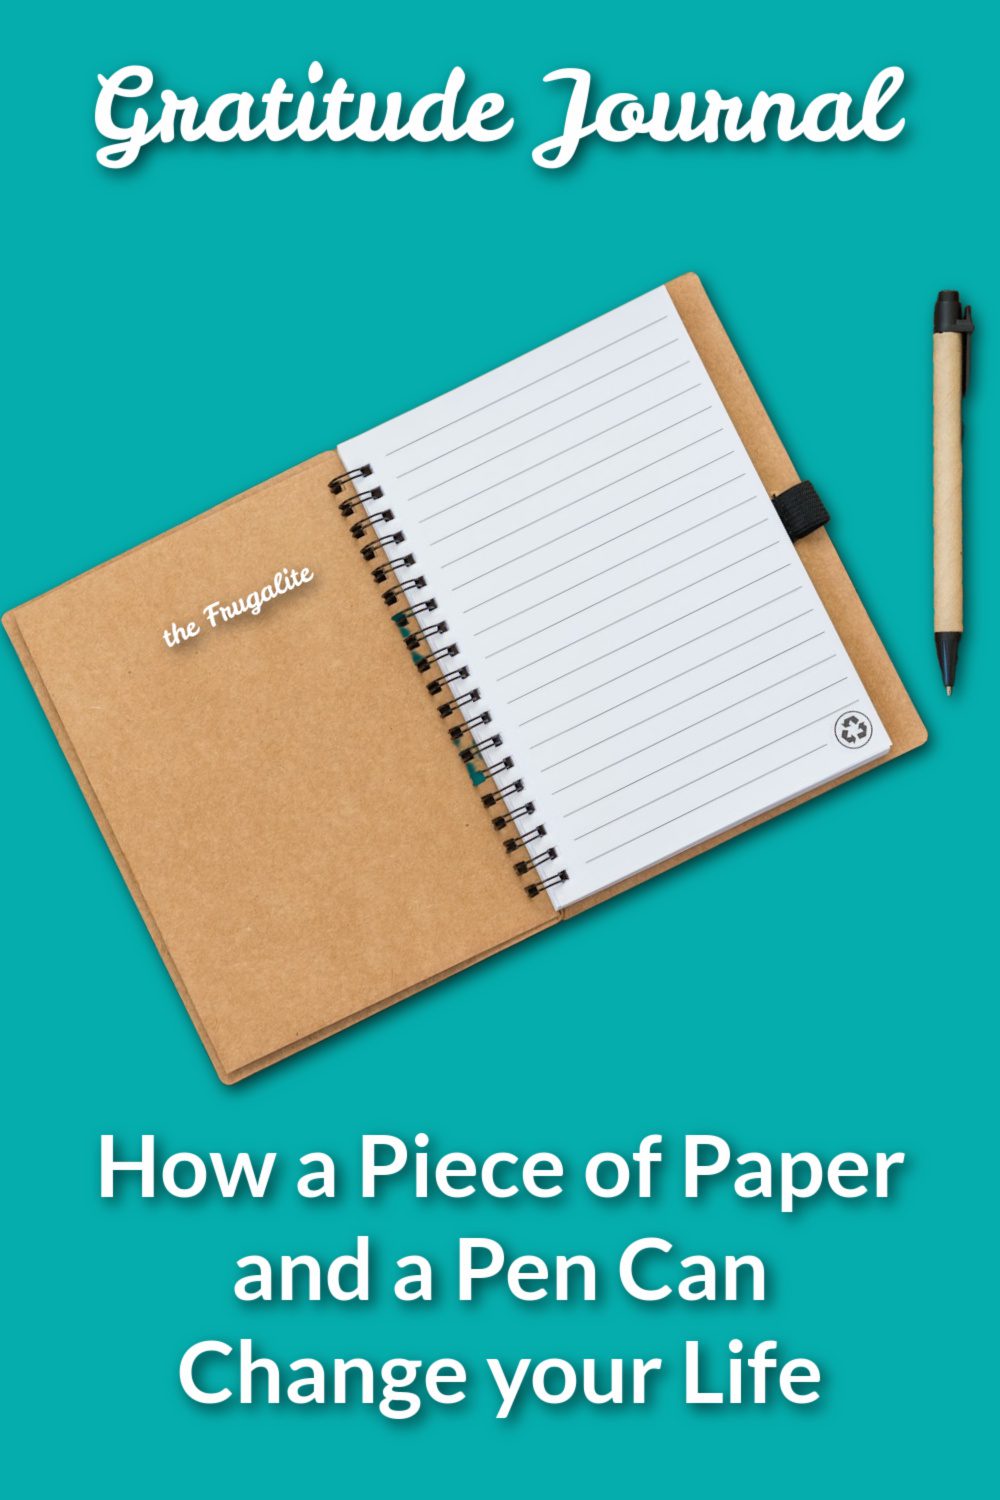 Gratitude Journal: How a Piece of Paper and a Pen Can Change your Life